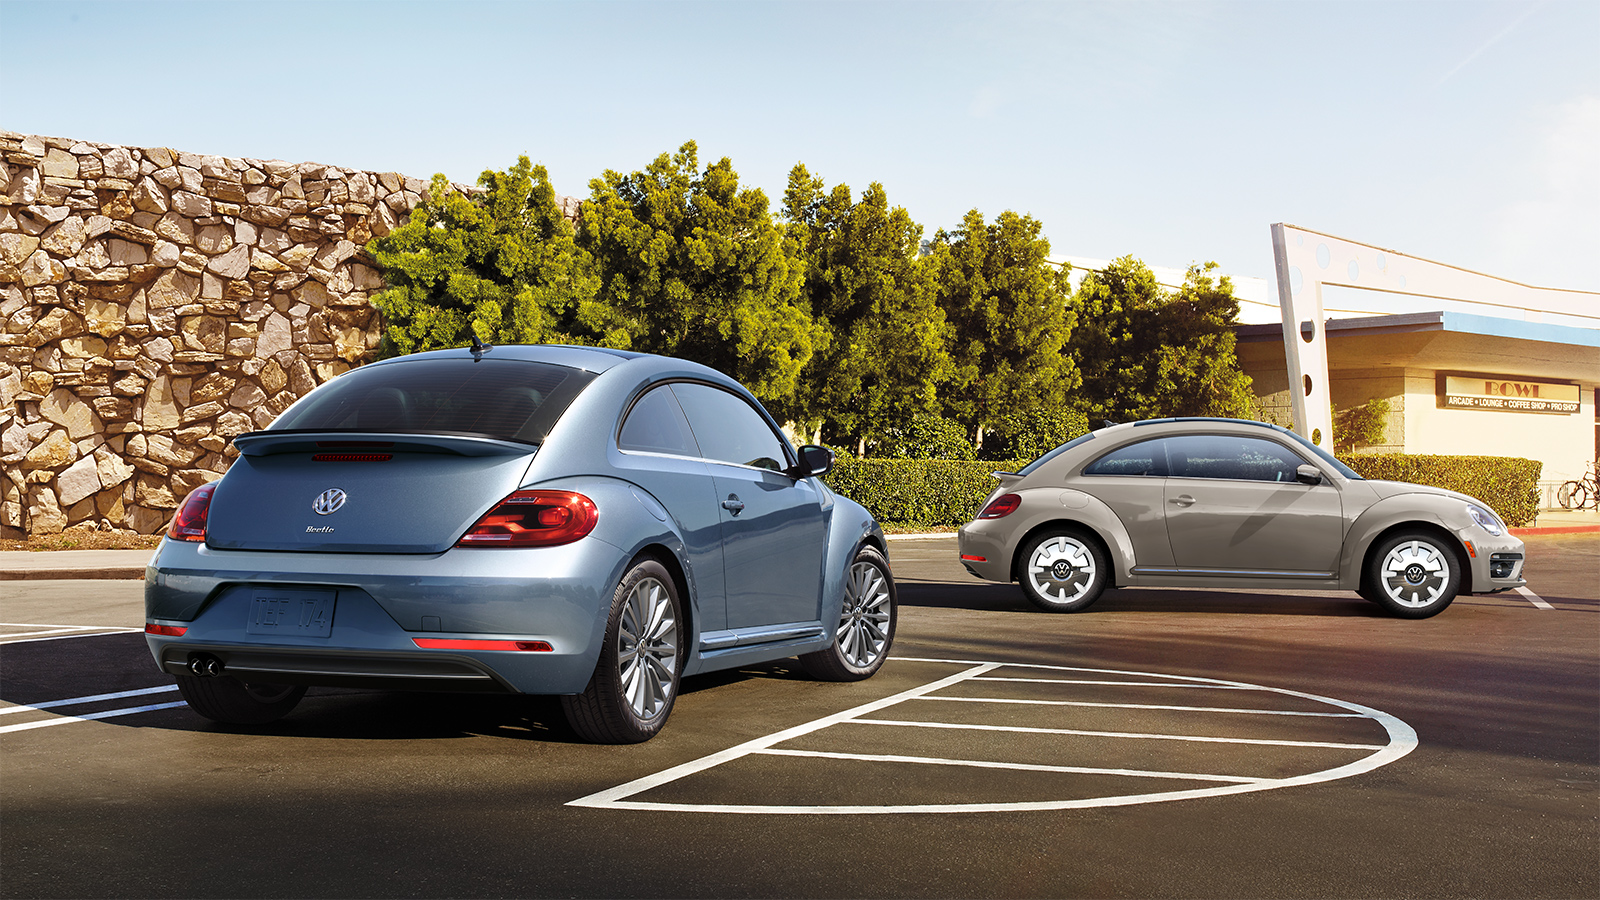 A pair of 2019 Volkswagen Beetle Final Editions on display in a parking lot